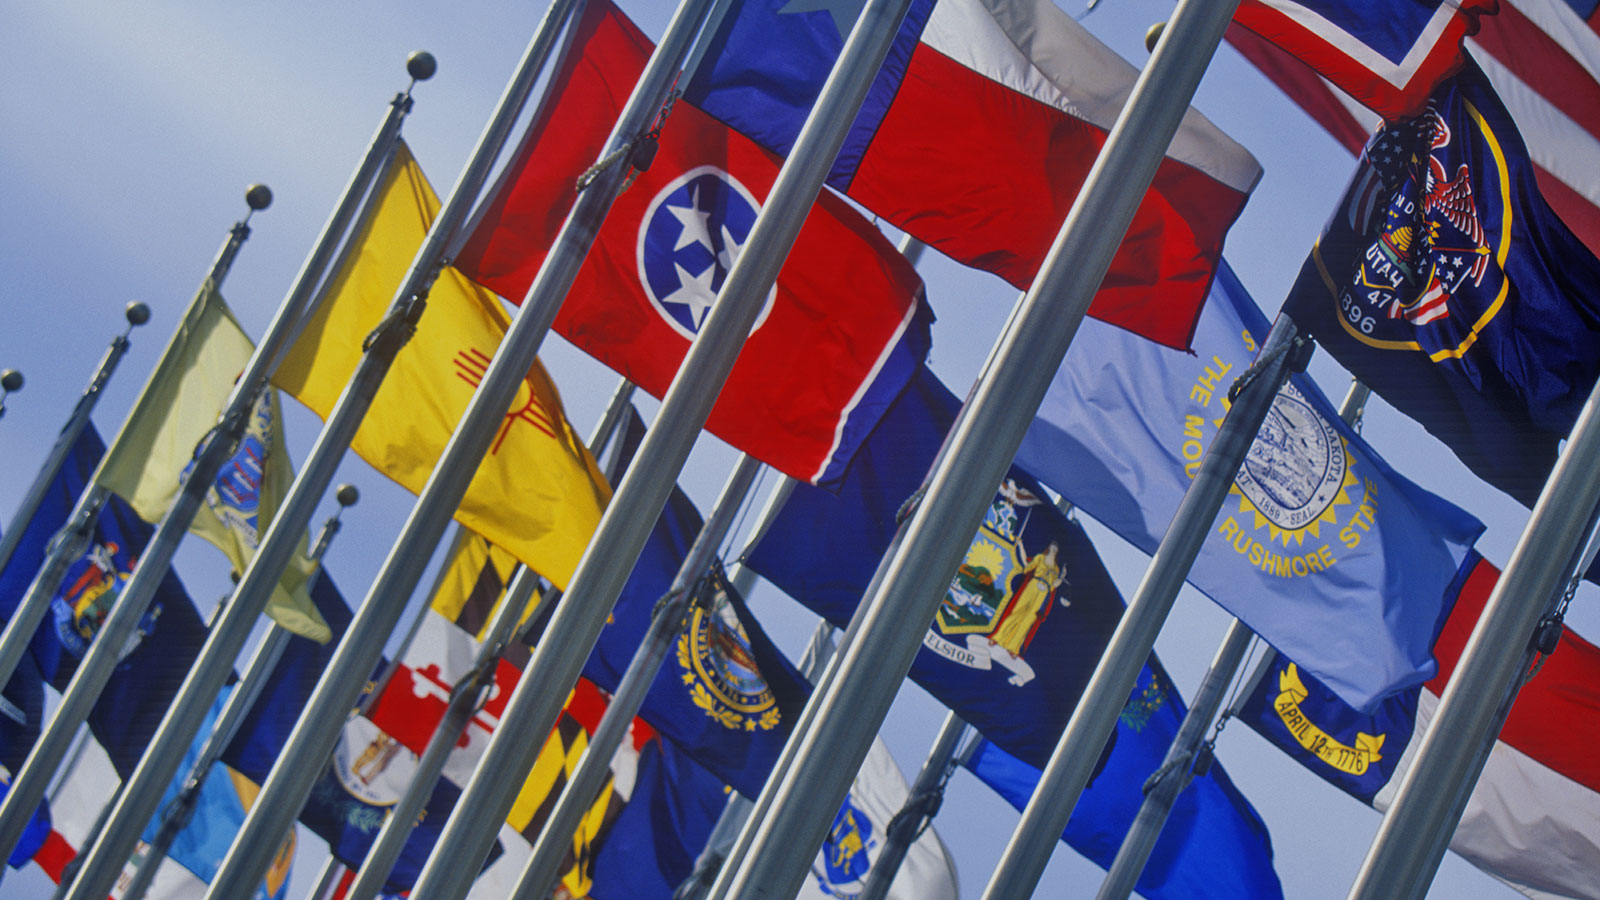 State flags on flagpoles lined up together